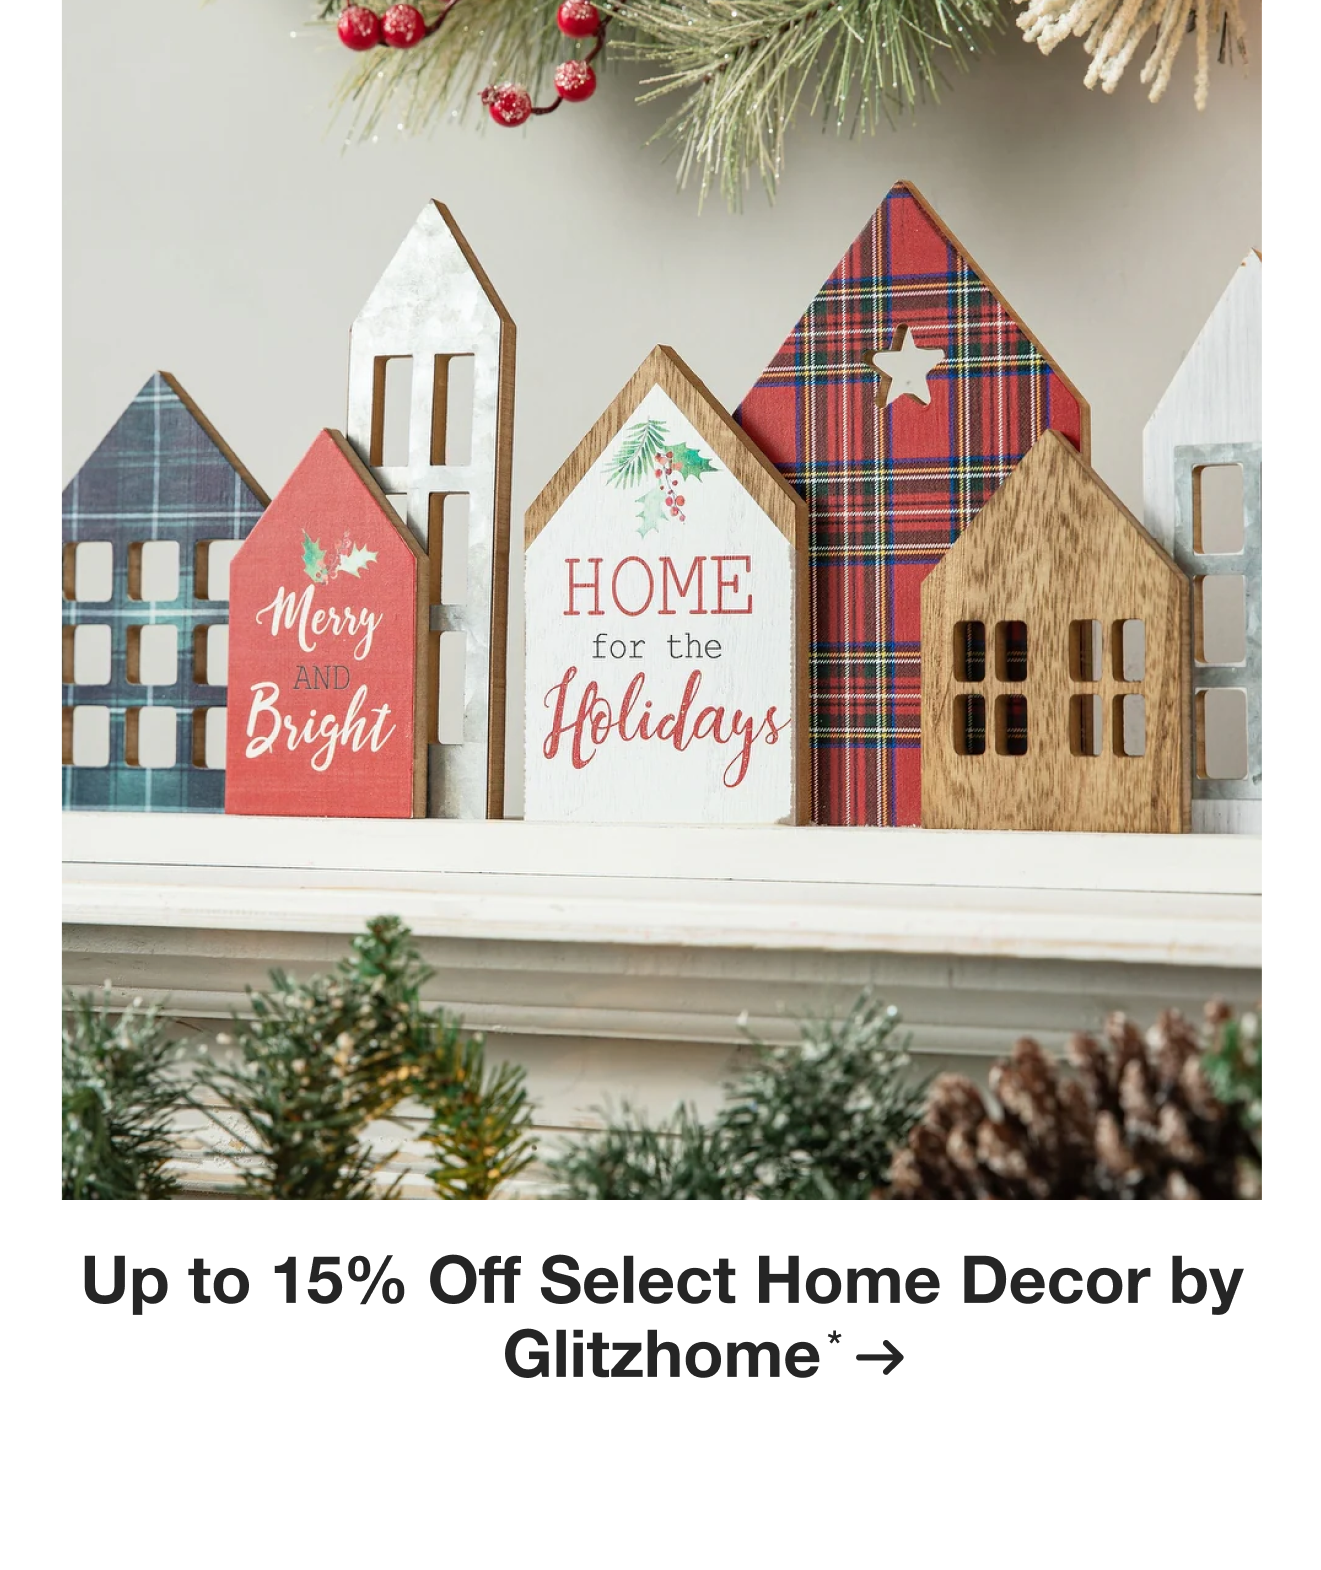 Up to 15% Off Select Home Decor by Glitzhome*